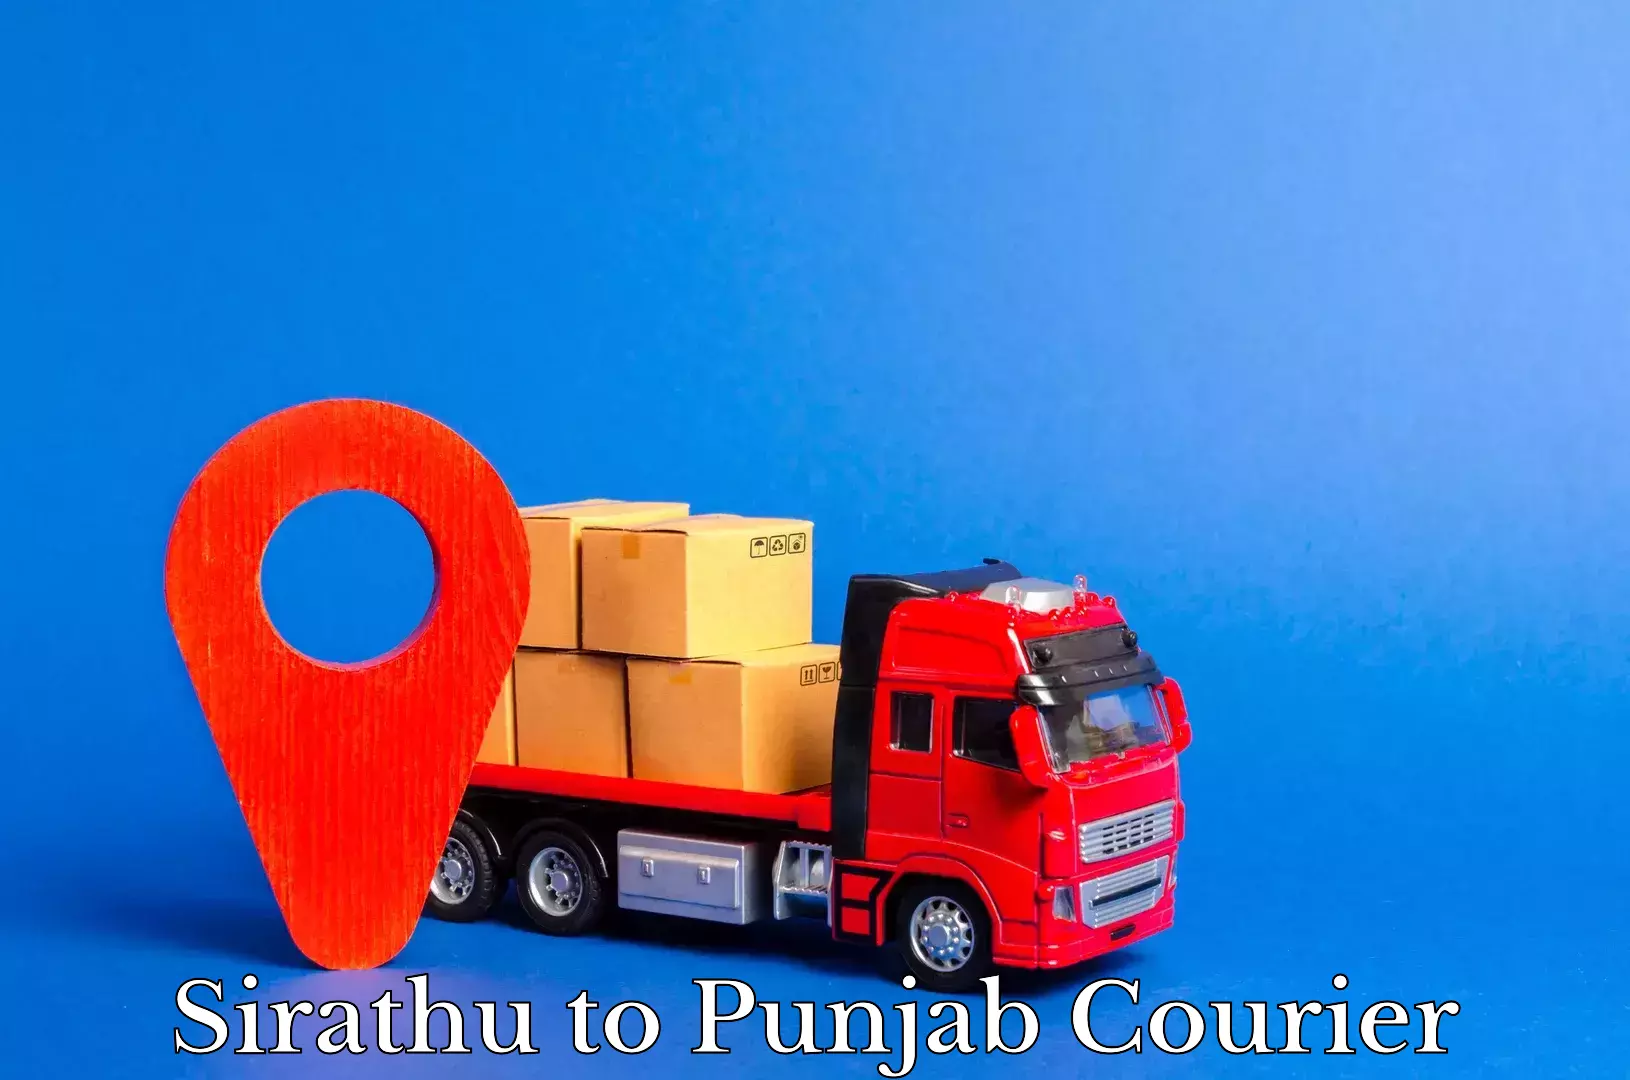 Tailored freight services Sirathu to Punjab